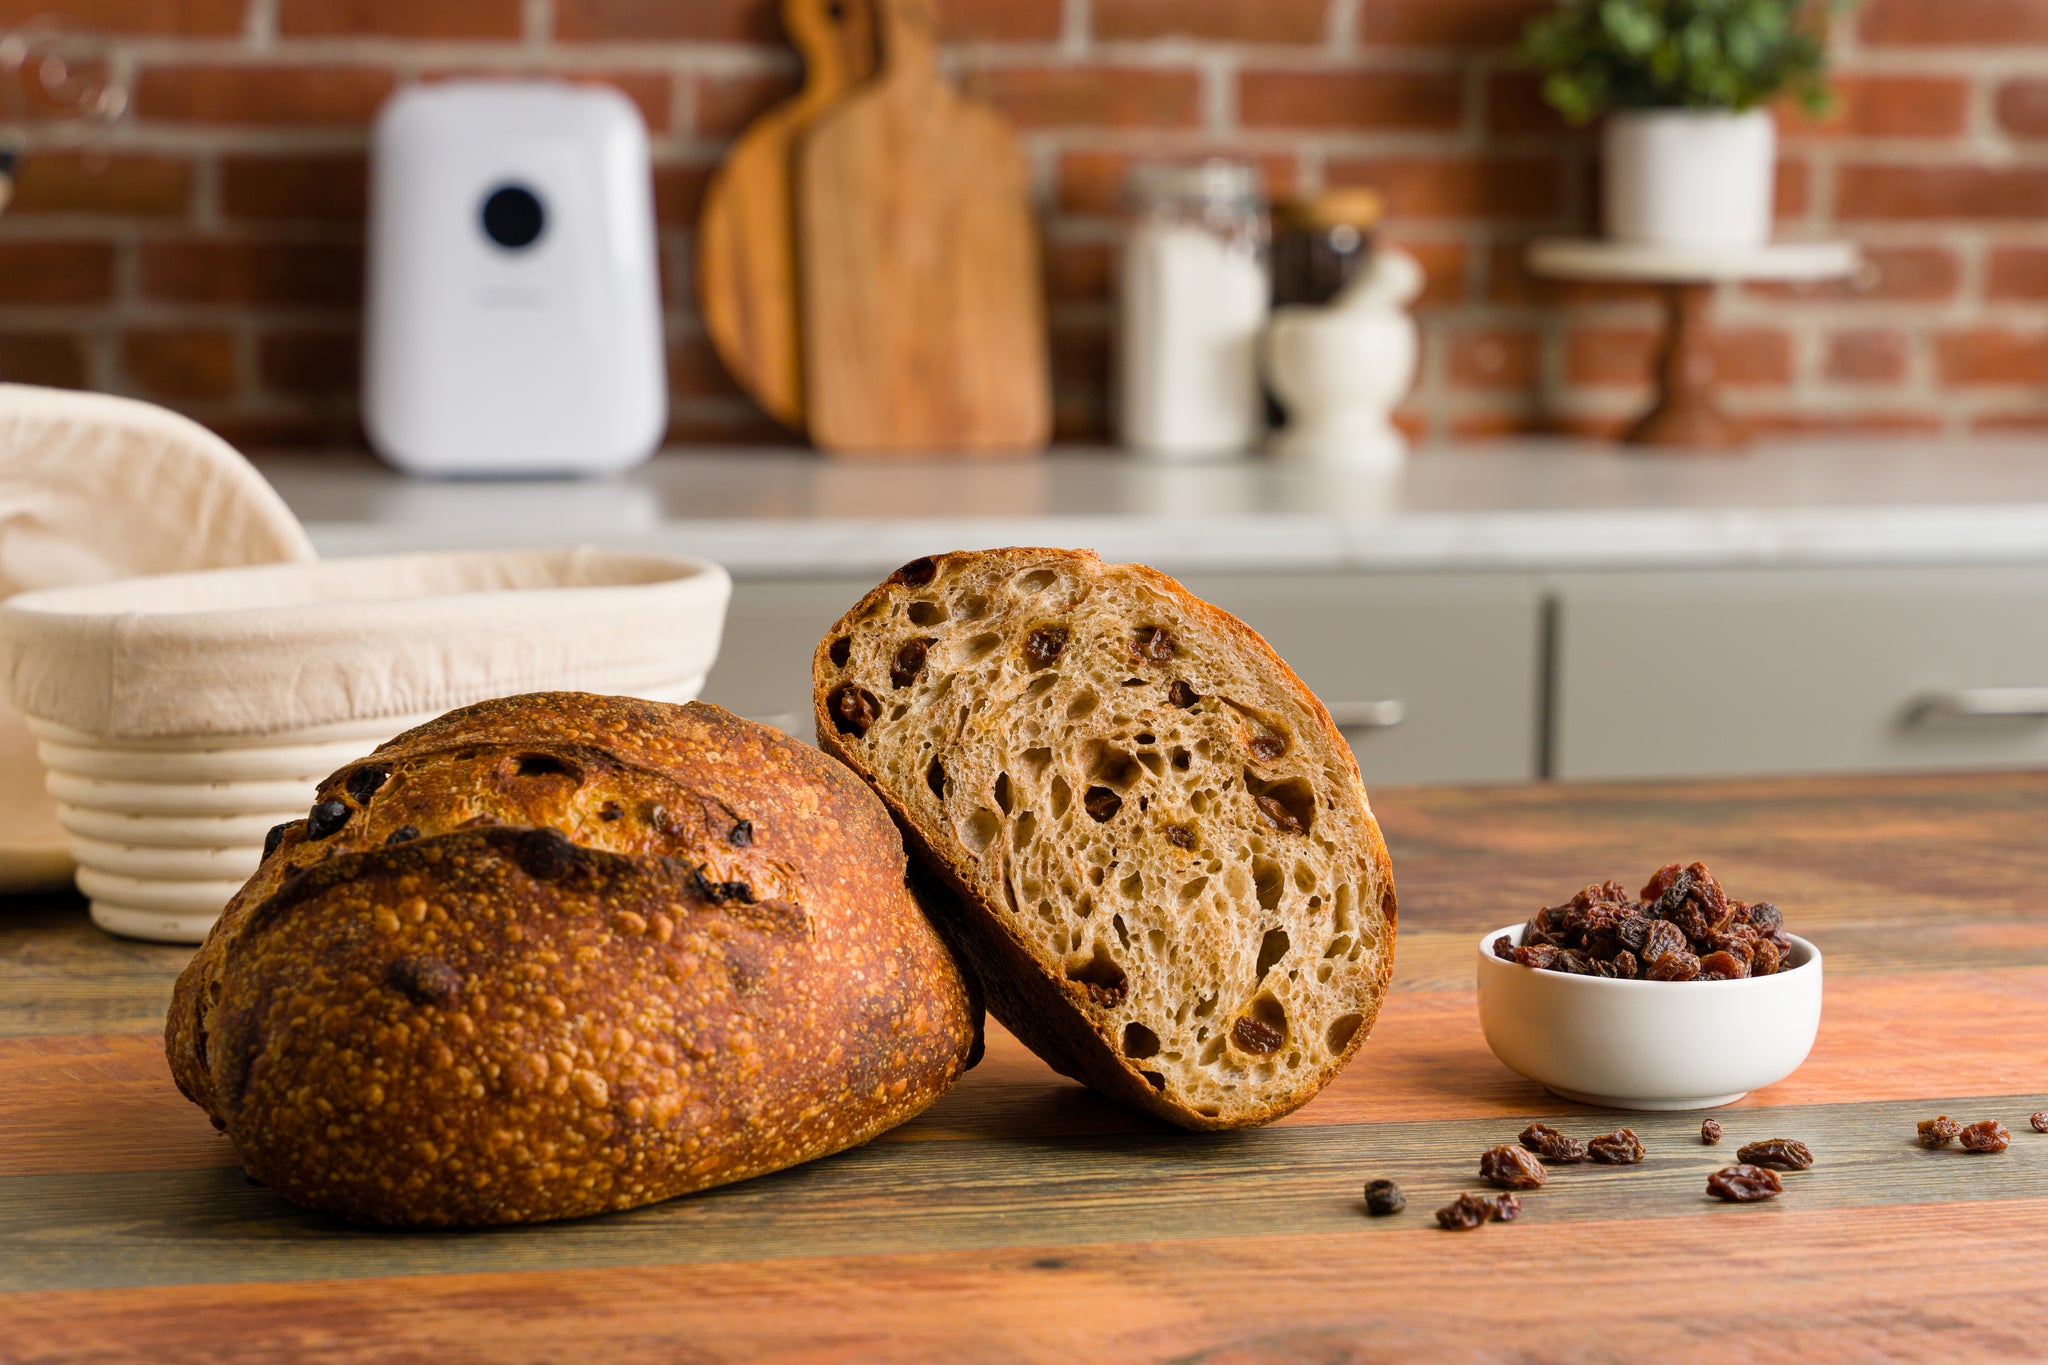 A half loaf of cinnamon raisin bread propped op on a whole loaf with a small bowl of raisins to the right side